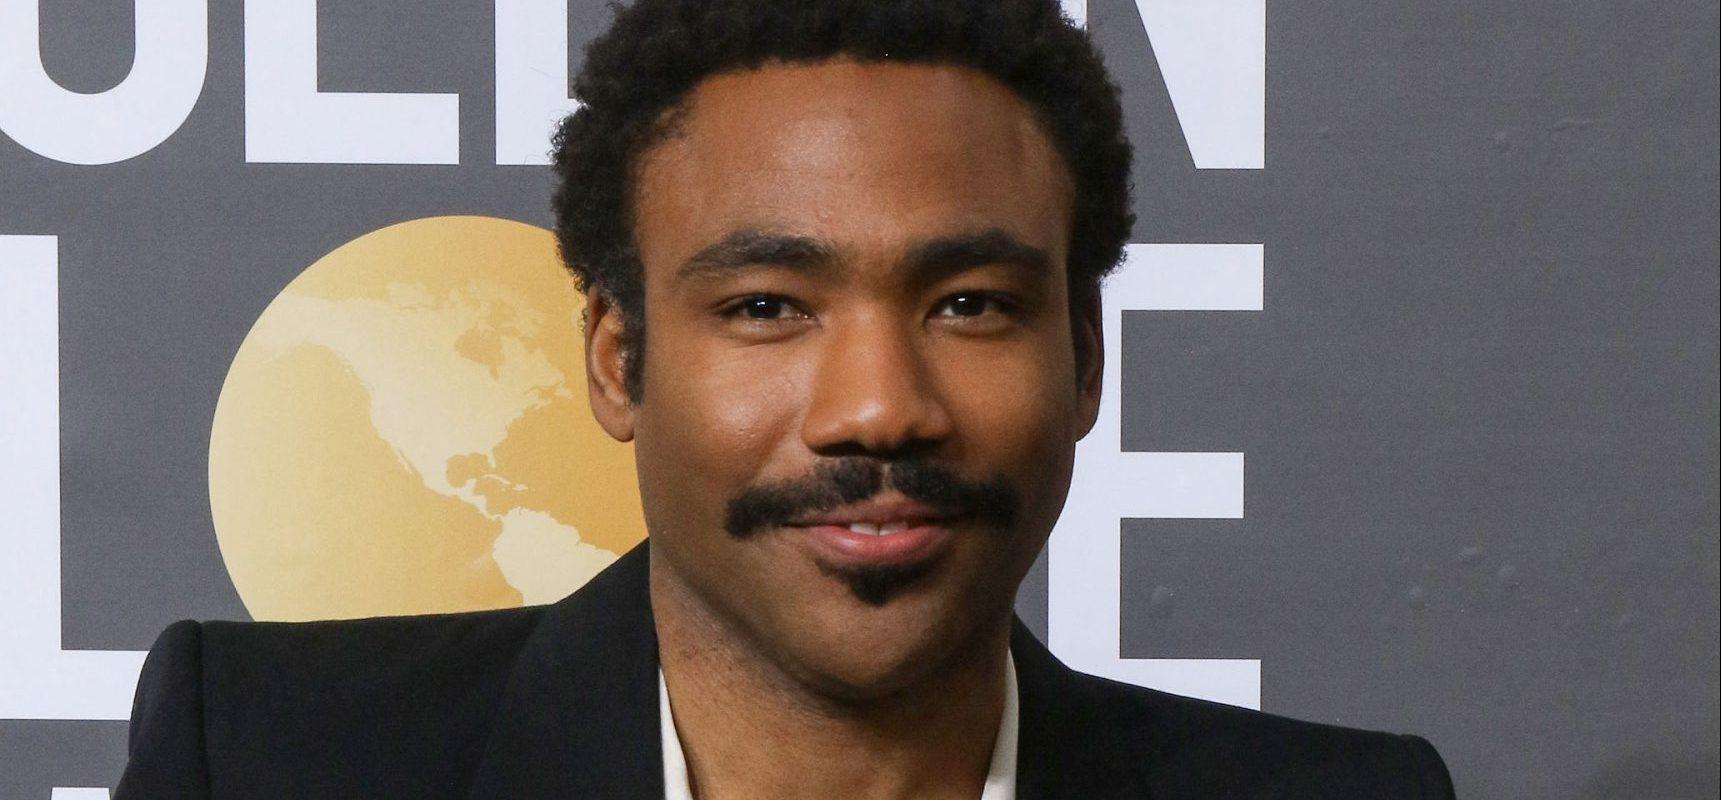 Donald Glover’s ‘Star Wars’ Series ‘Lando’ Will Now Be A Movie